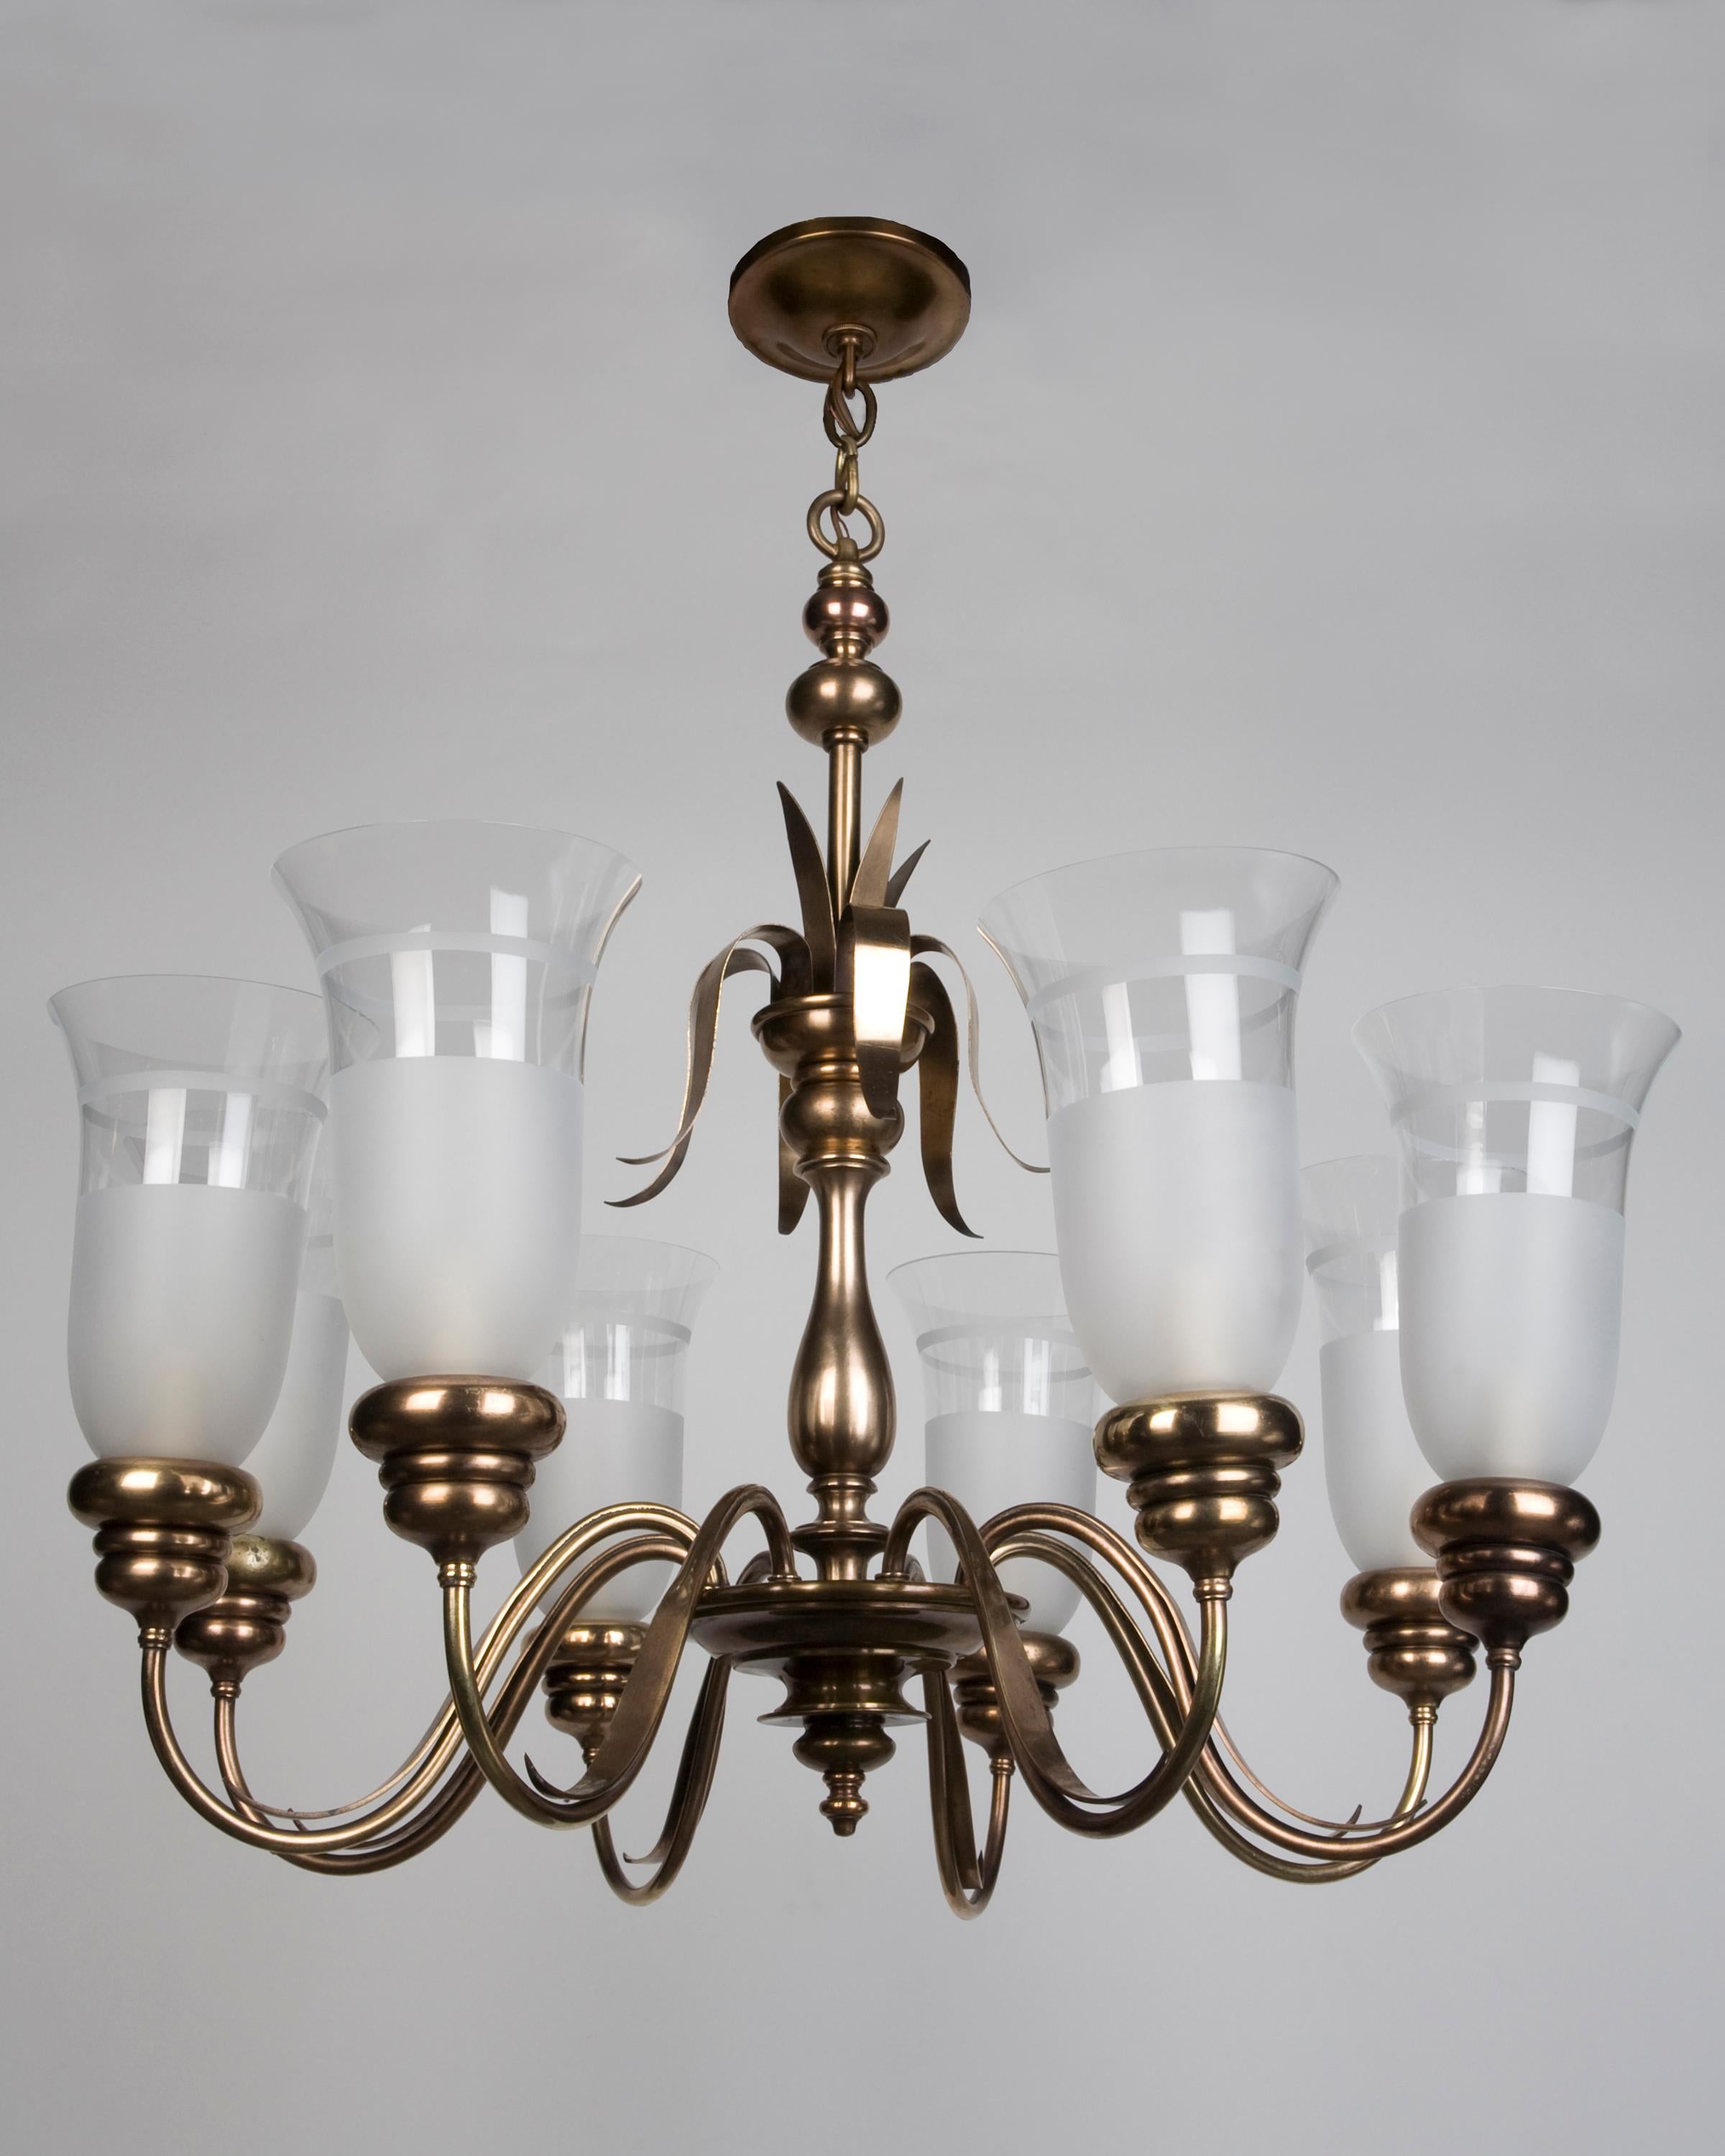 AHL3551

A vintage eight arm aged brass chandelier with frosted glass hurricane shades. The column and the arms are detailed with delicate scrolls. Signed by the New York maker E. F. Caldwell.

DIMENSIONS: 
Current height: 60